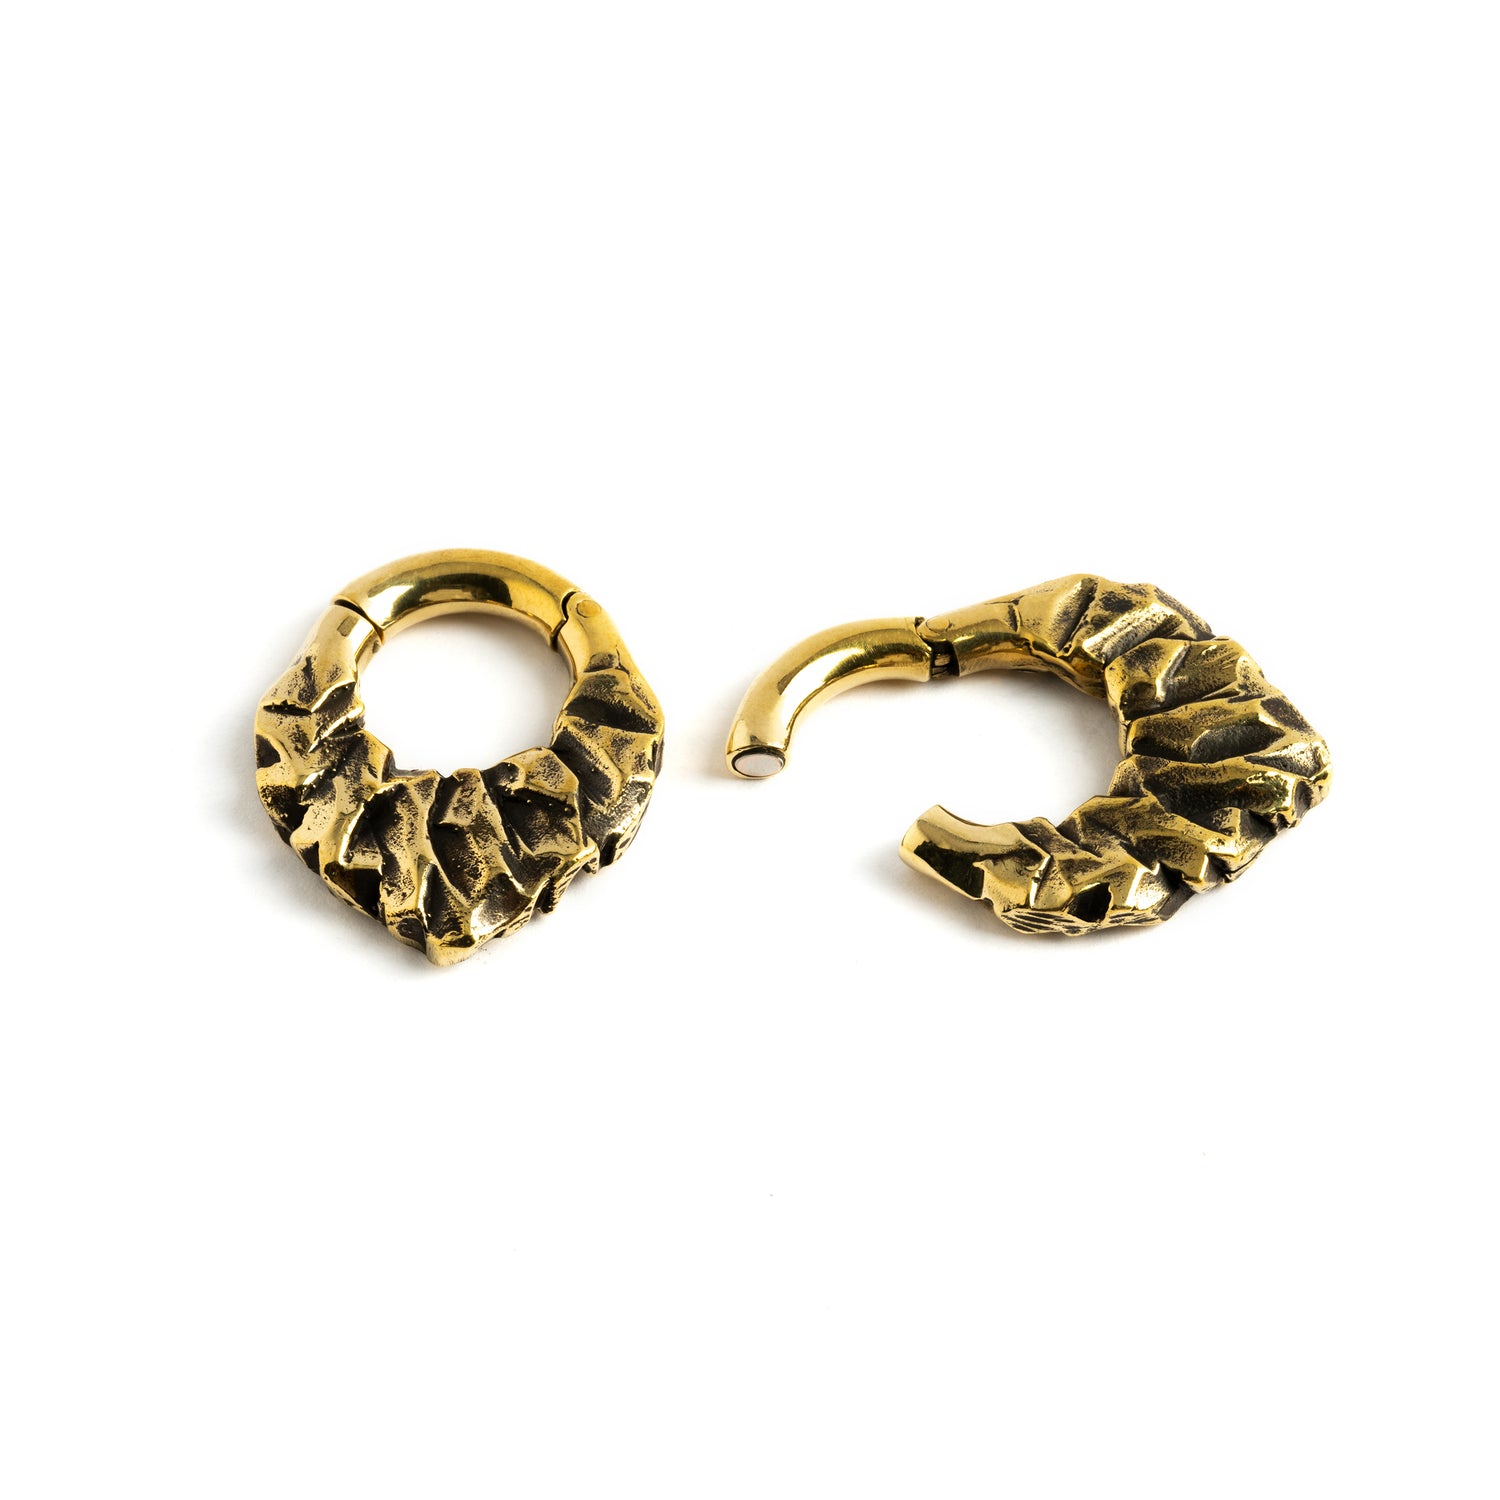 pair of gold brass teardrop shaped ear hoops hangers with rocky texture locking systeml view